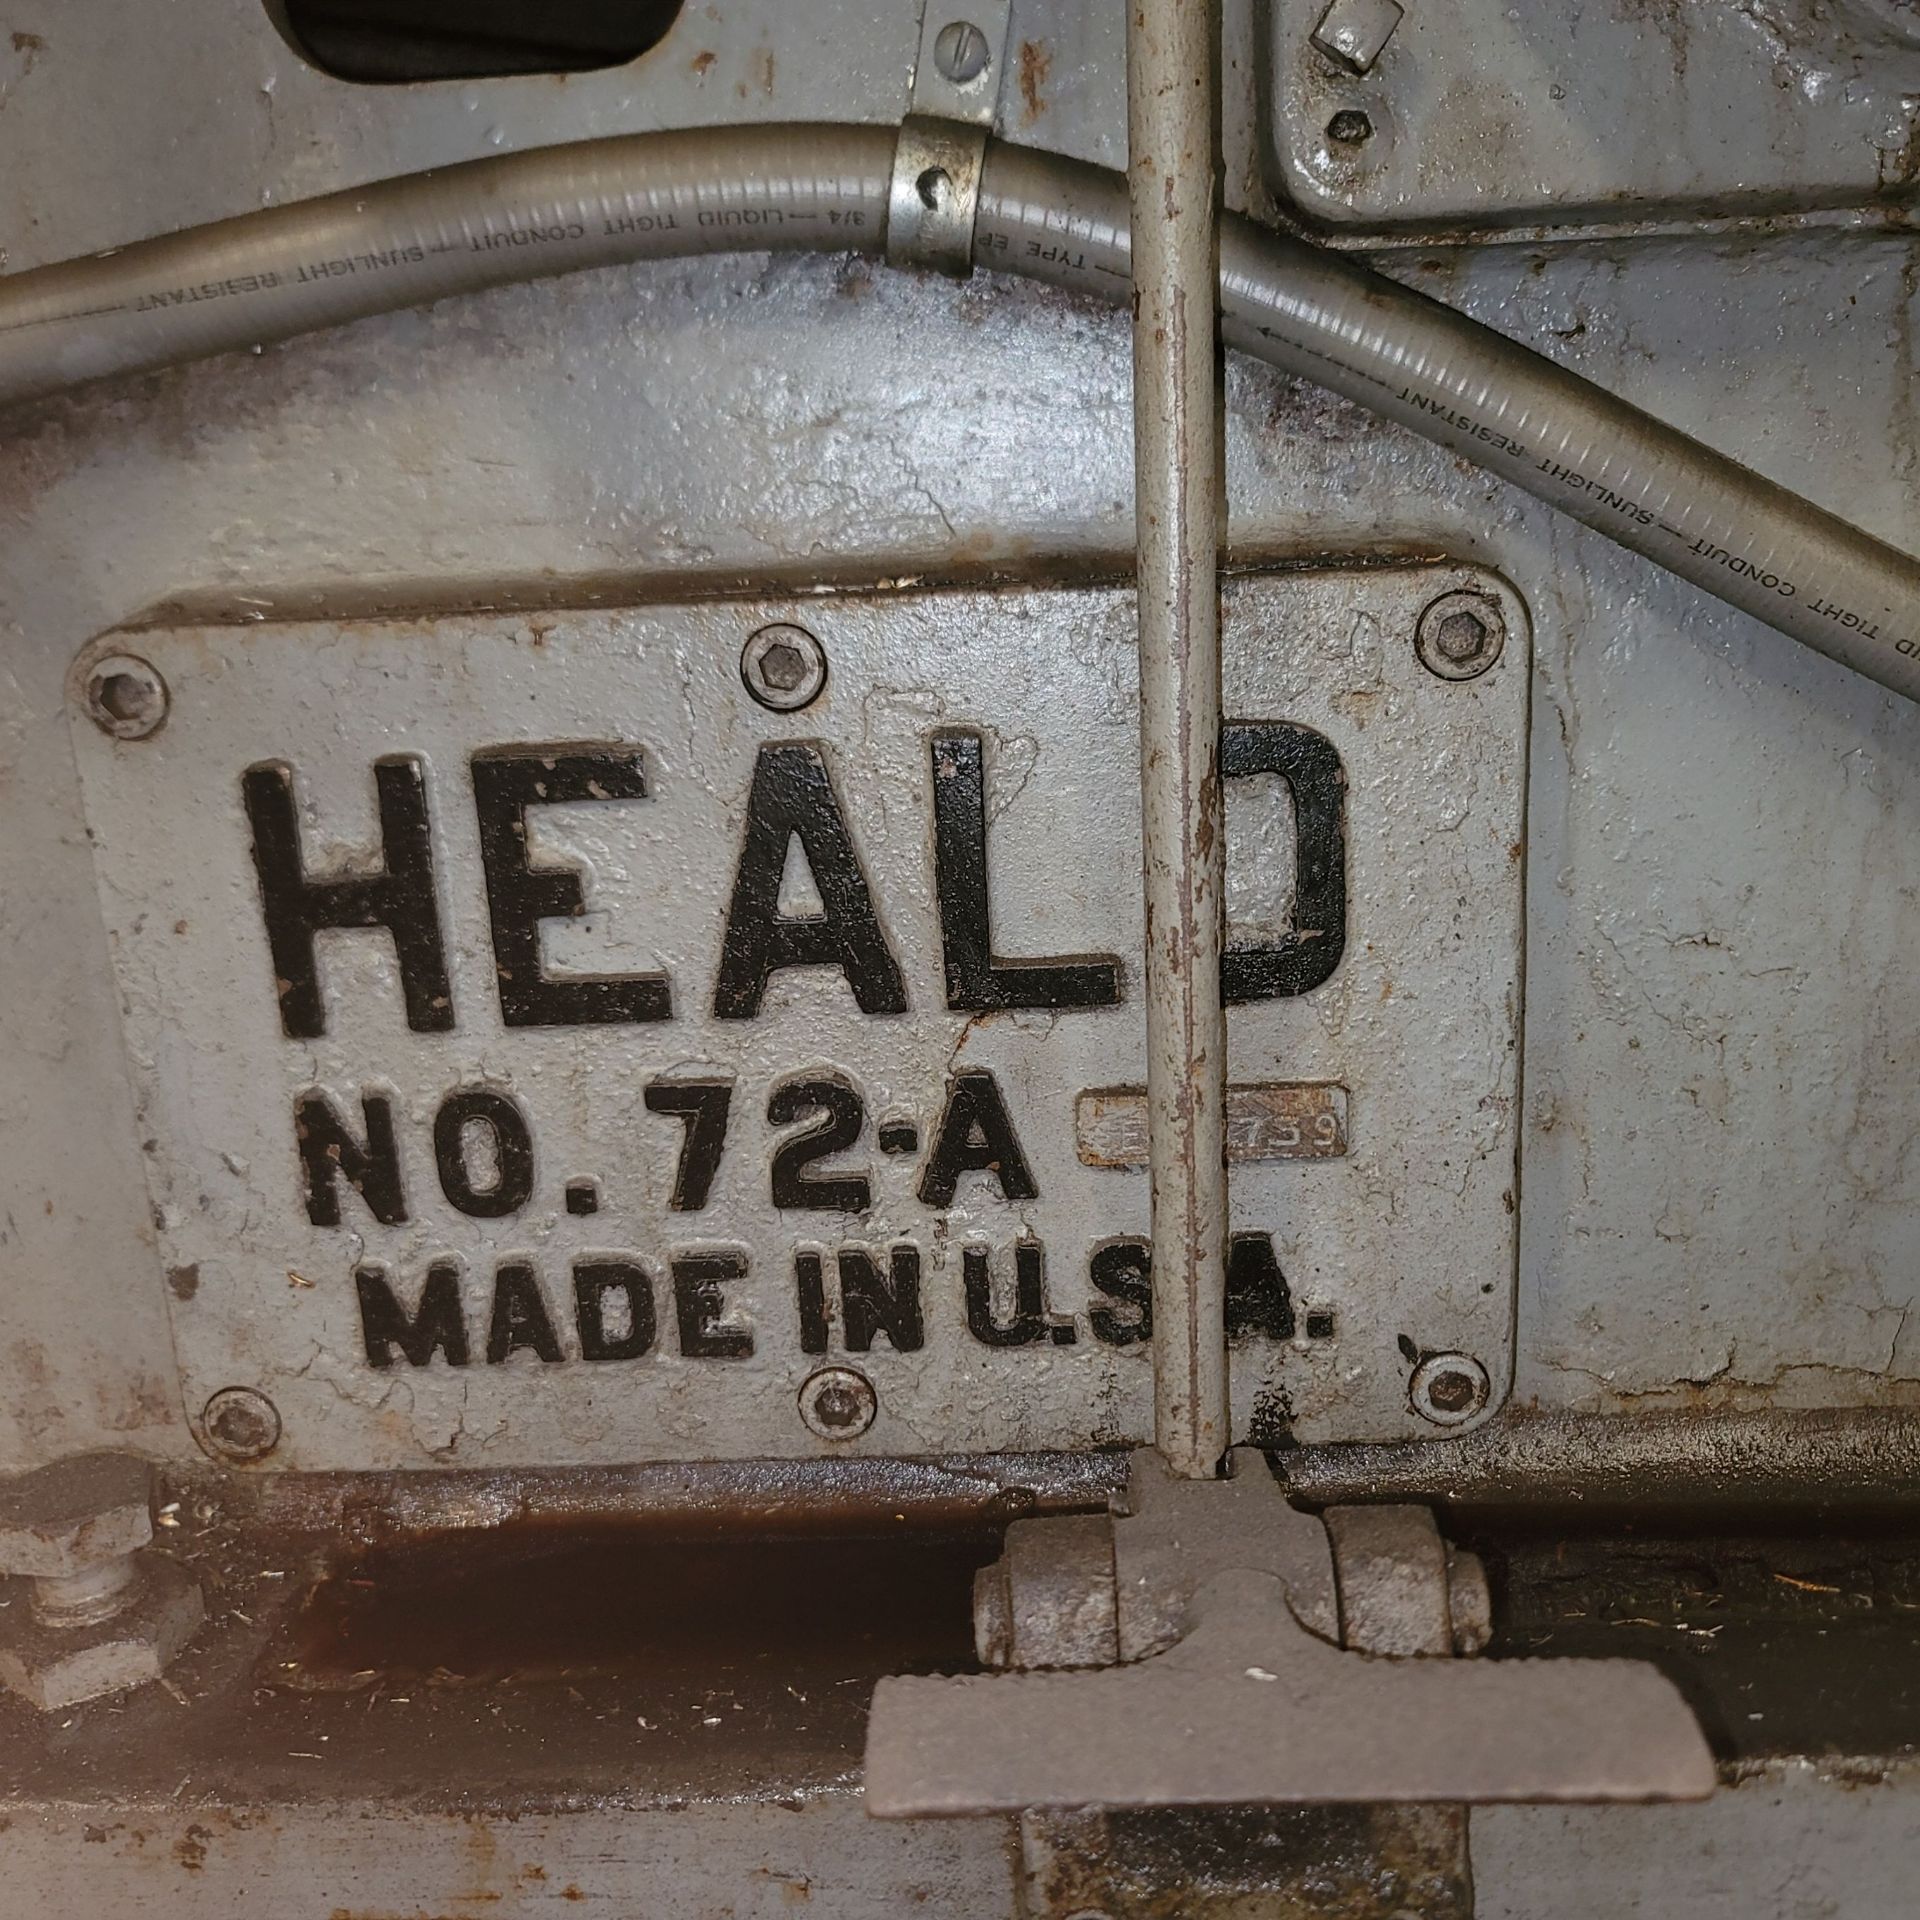 HEALD NO. 72-A ID GRINDER, 24" FACE PLATE, S/N 9739 - Image 5 of 5